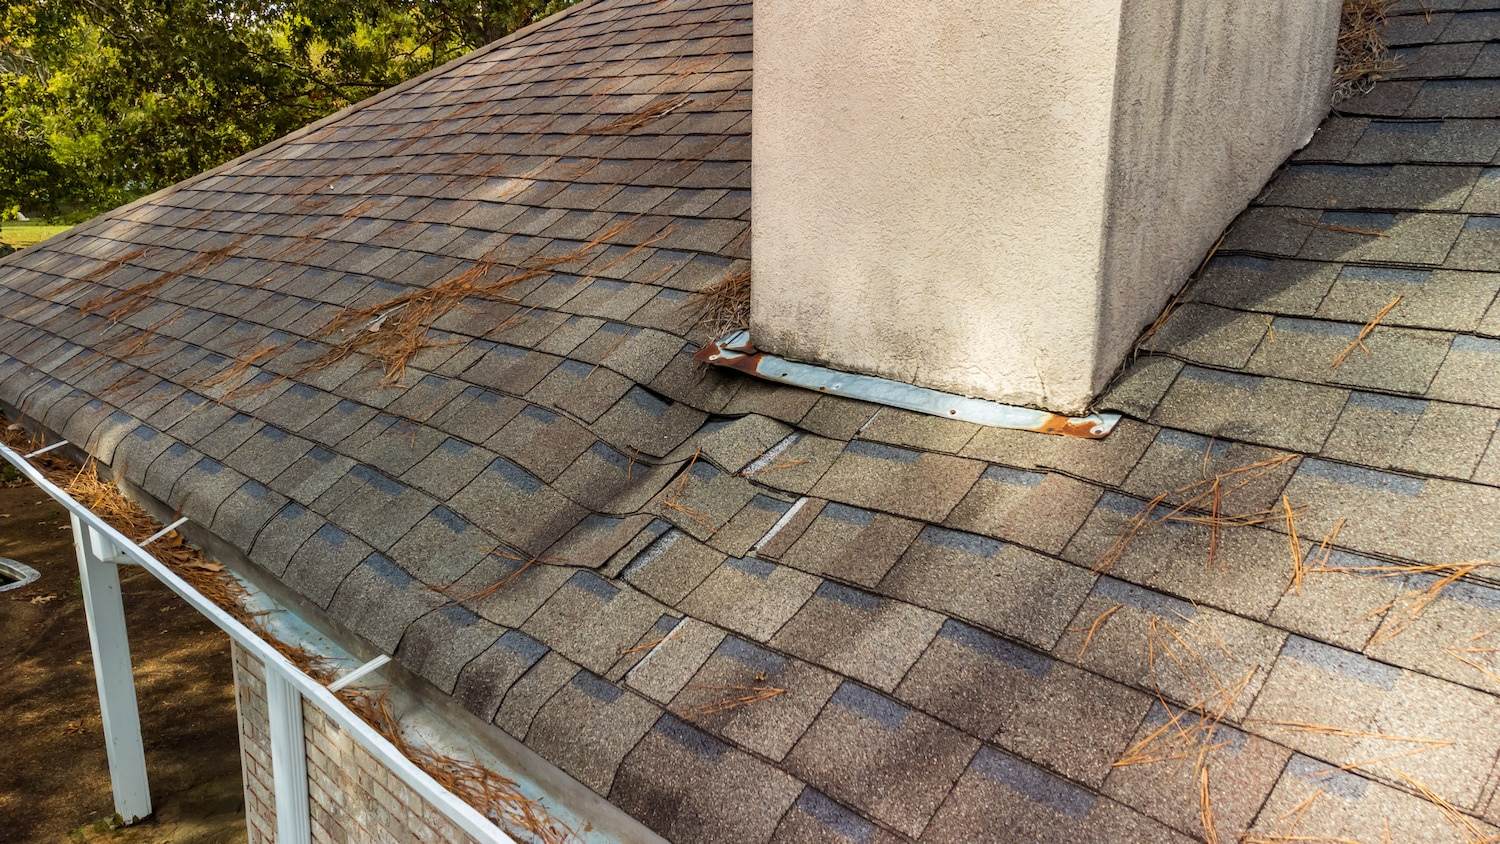 How To Find Roof Leak